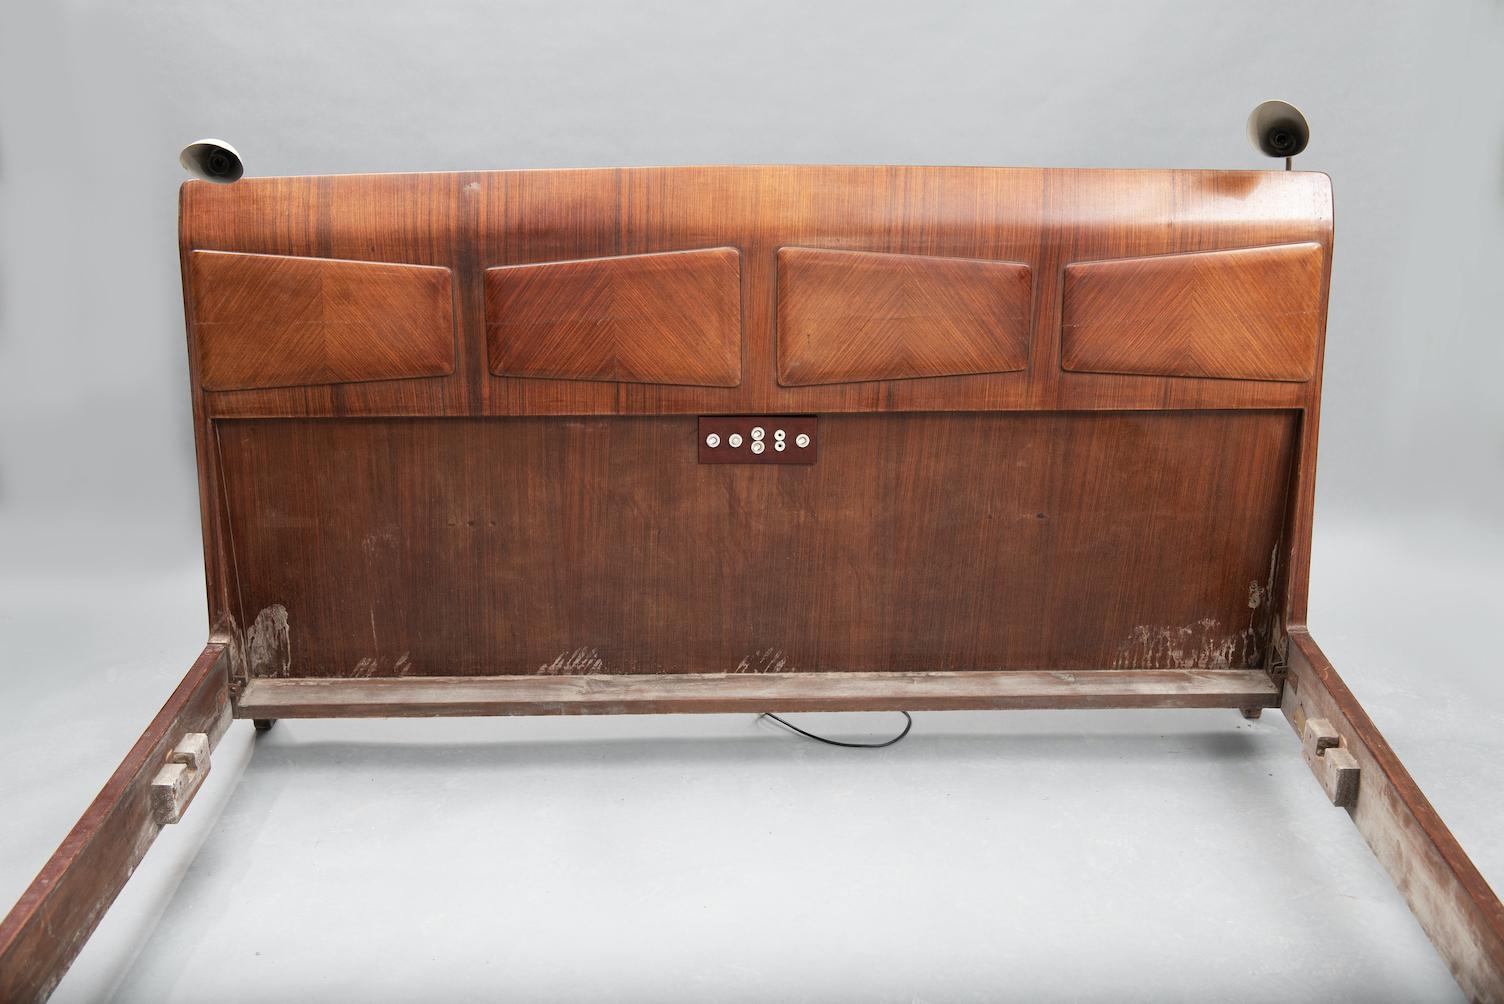 Mid Century Italian Modern rosewood Bed Frame with two reading lamps
The price shown is in the original condition.
We have our own workshop and we can restore this item professionally, please be free to ask the fully restored price for this item.